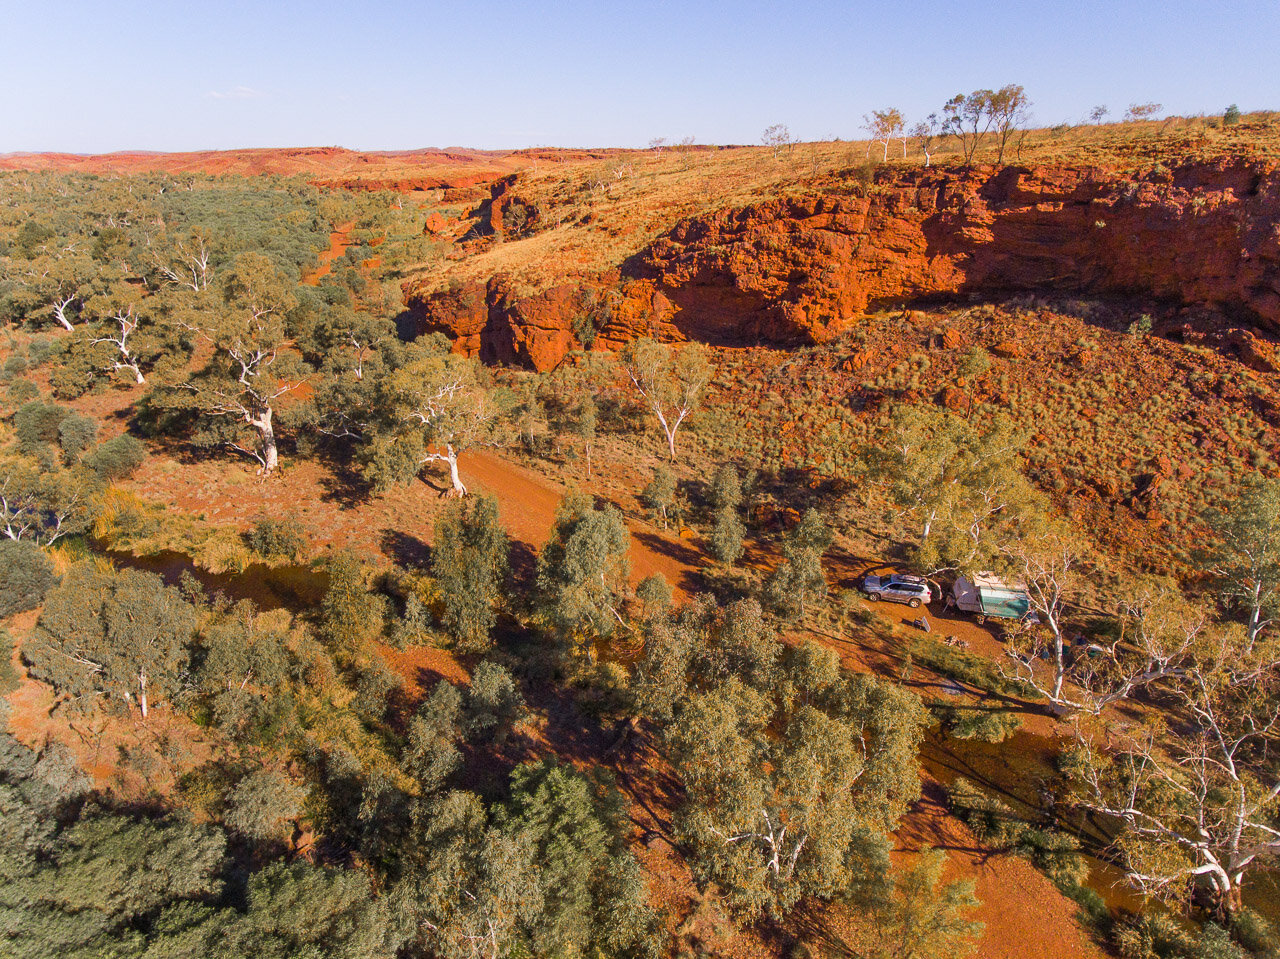 It's still possible to find secluded bush camps in WA's Pilbara region